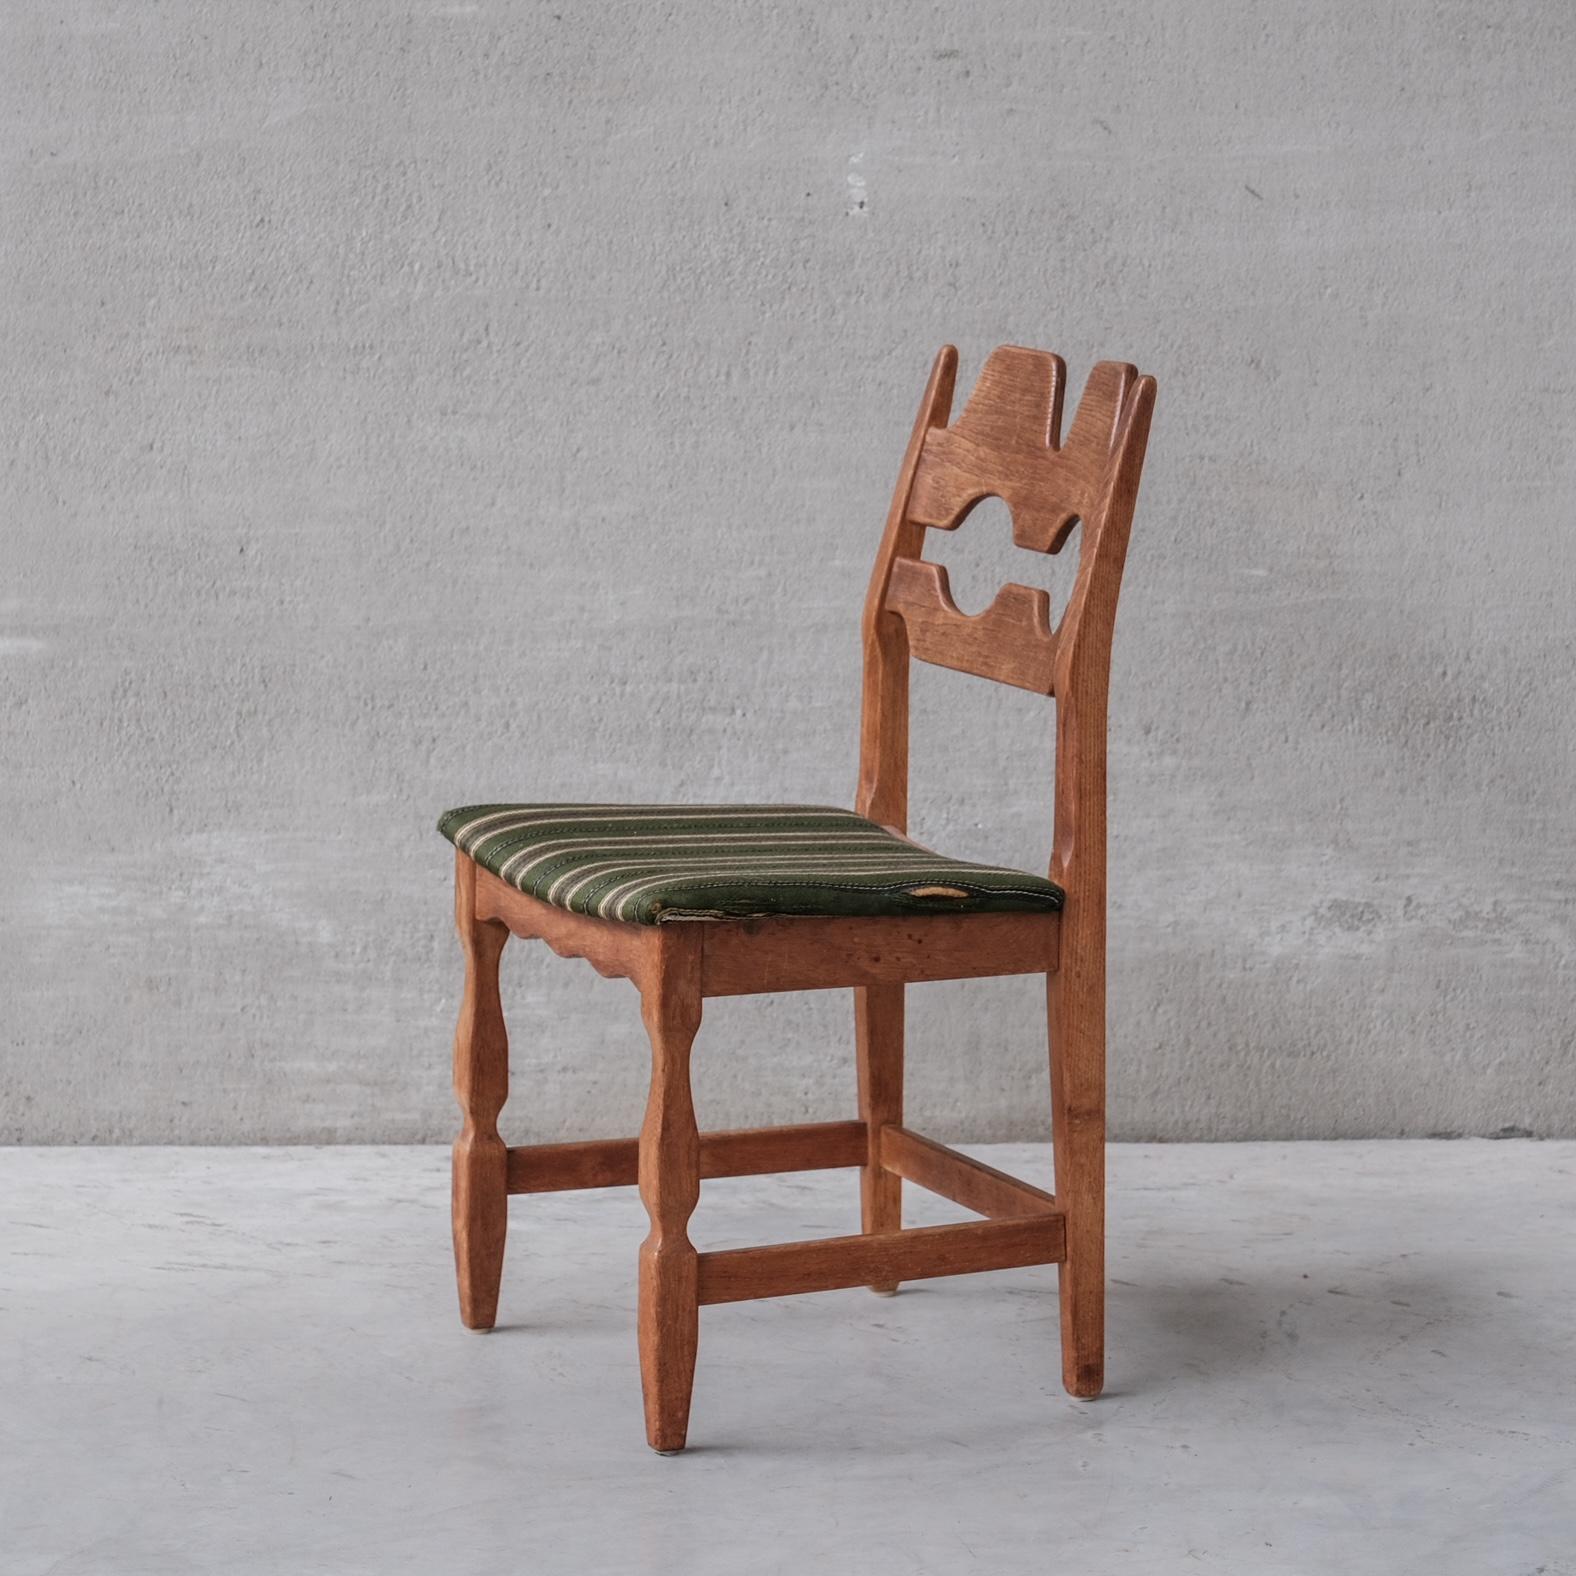 Oak dining chairs by Henning Kjaernulf. A set of Four.

Denmark, circa 1960s.

'Razor back' or 'Razor blade' model.

Original patina and finish.

Original upholstery has been retained but want's updating, the fabric is worn. We can update